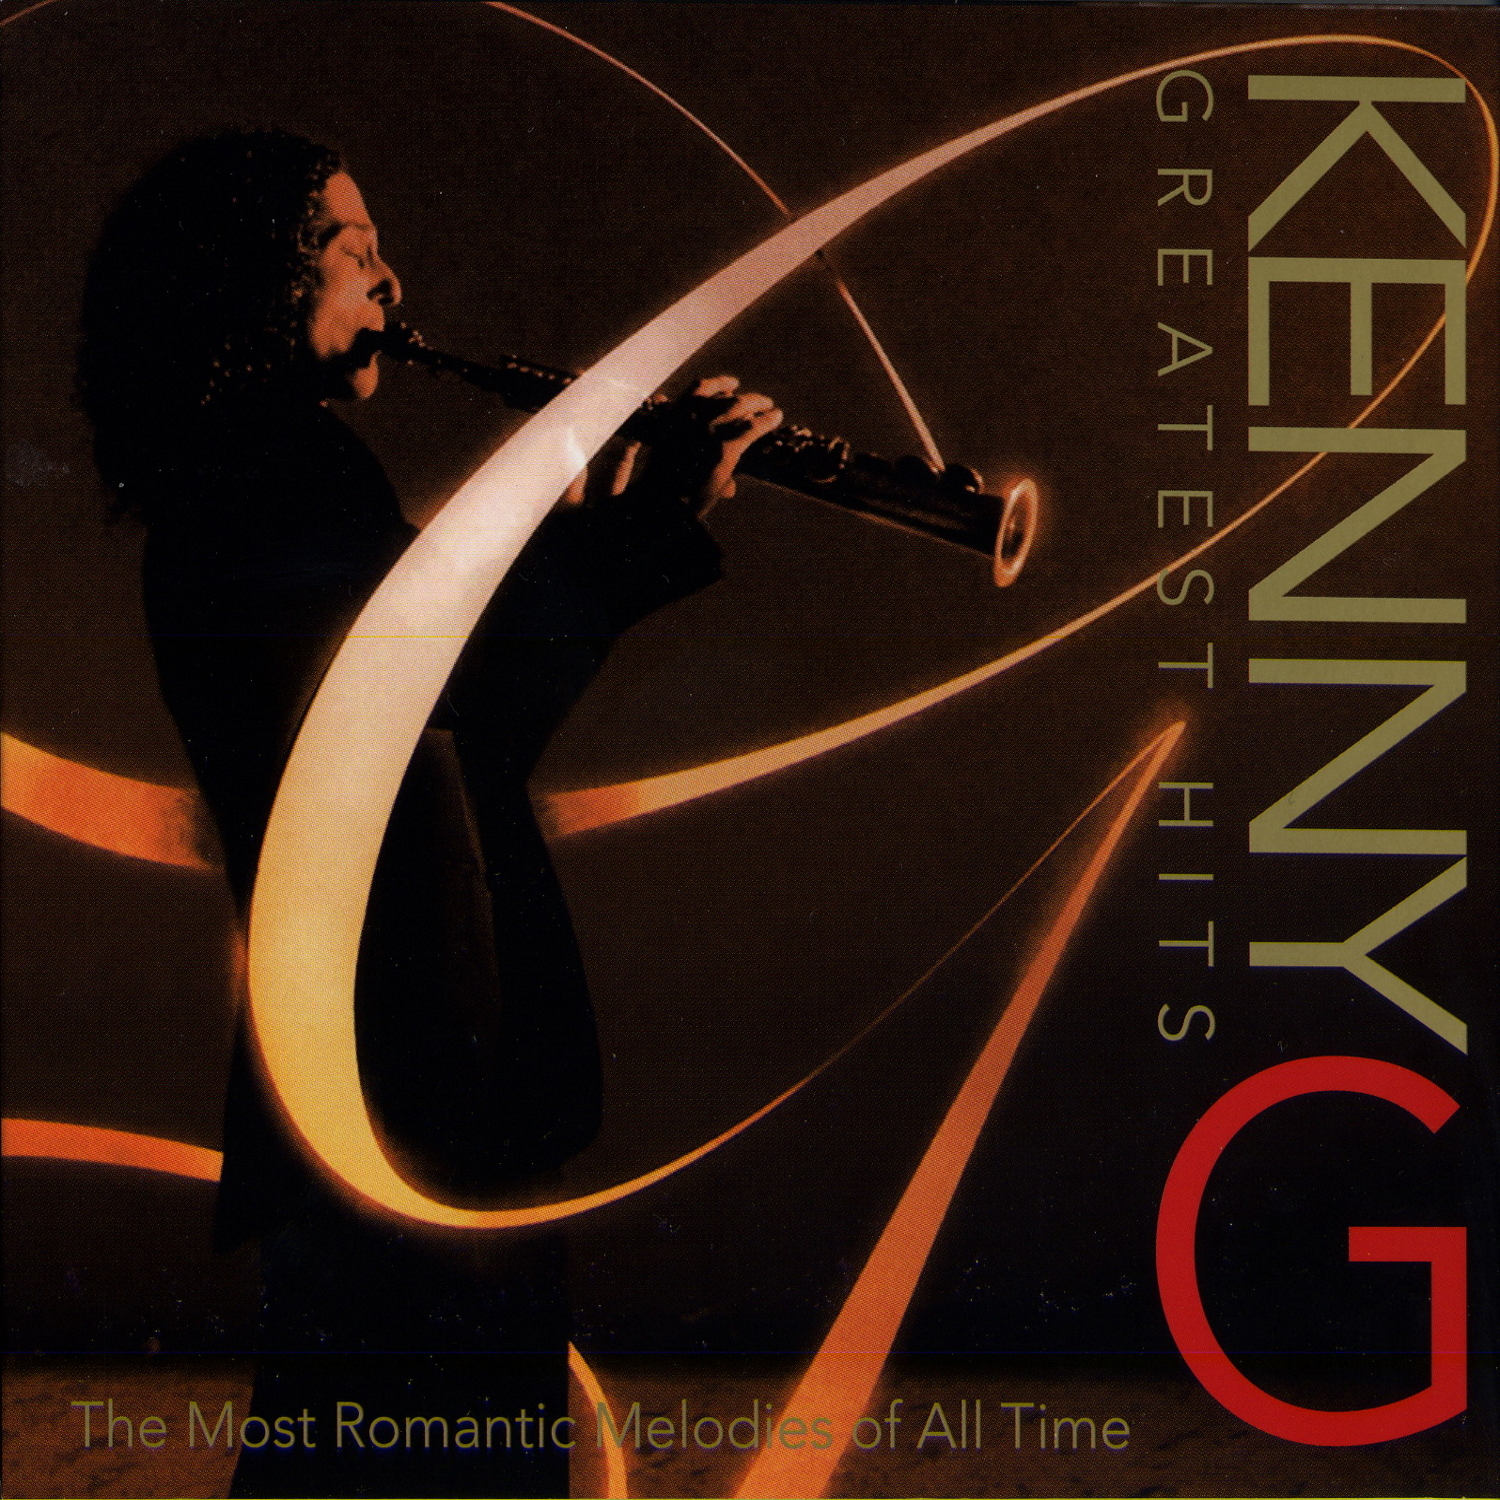 Kenny G - Greatest Hits